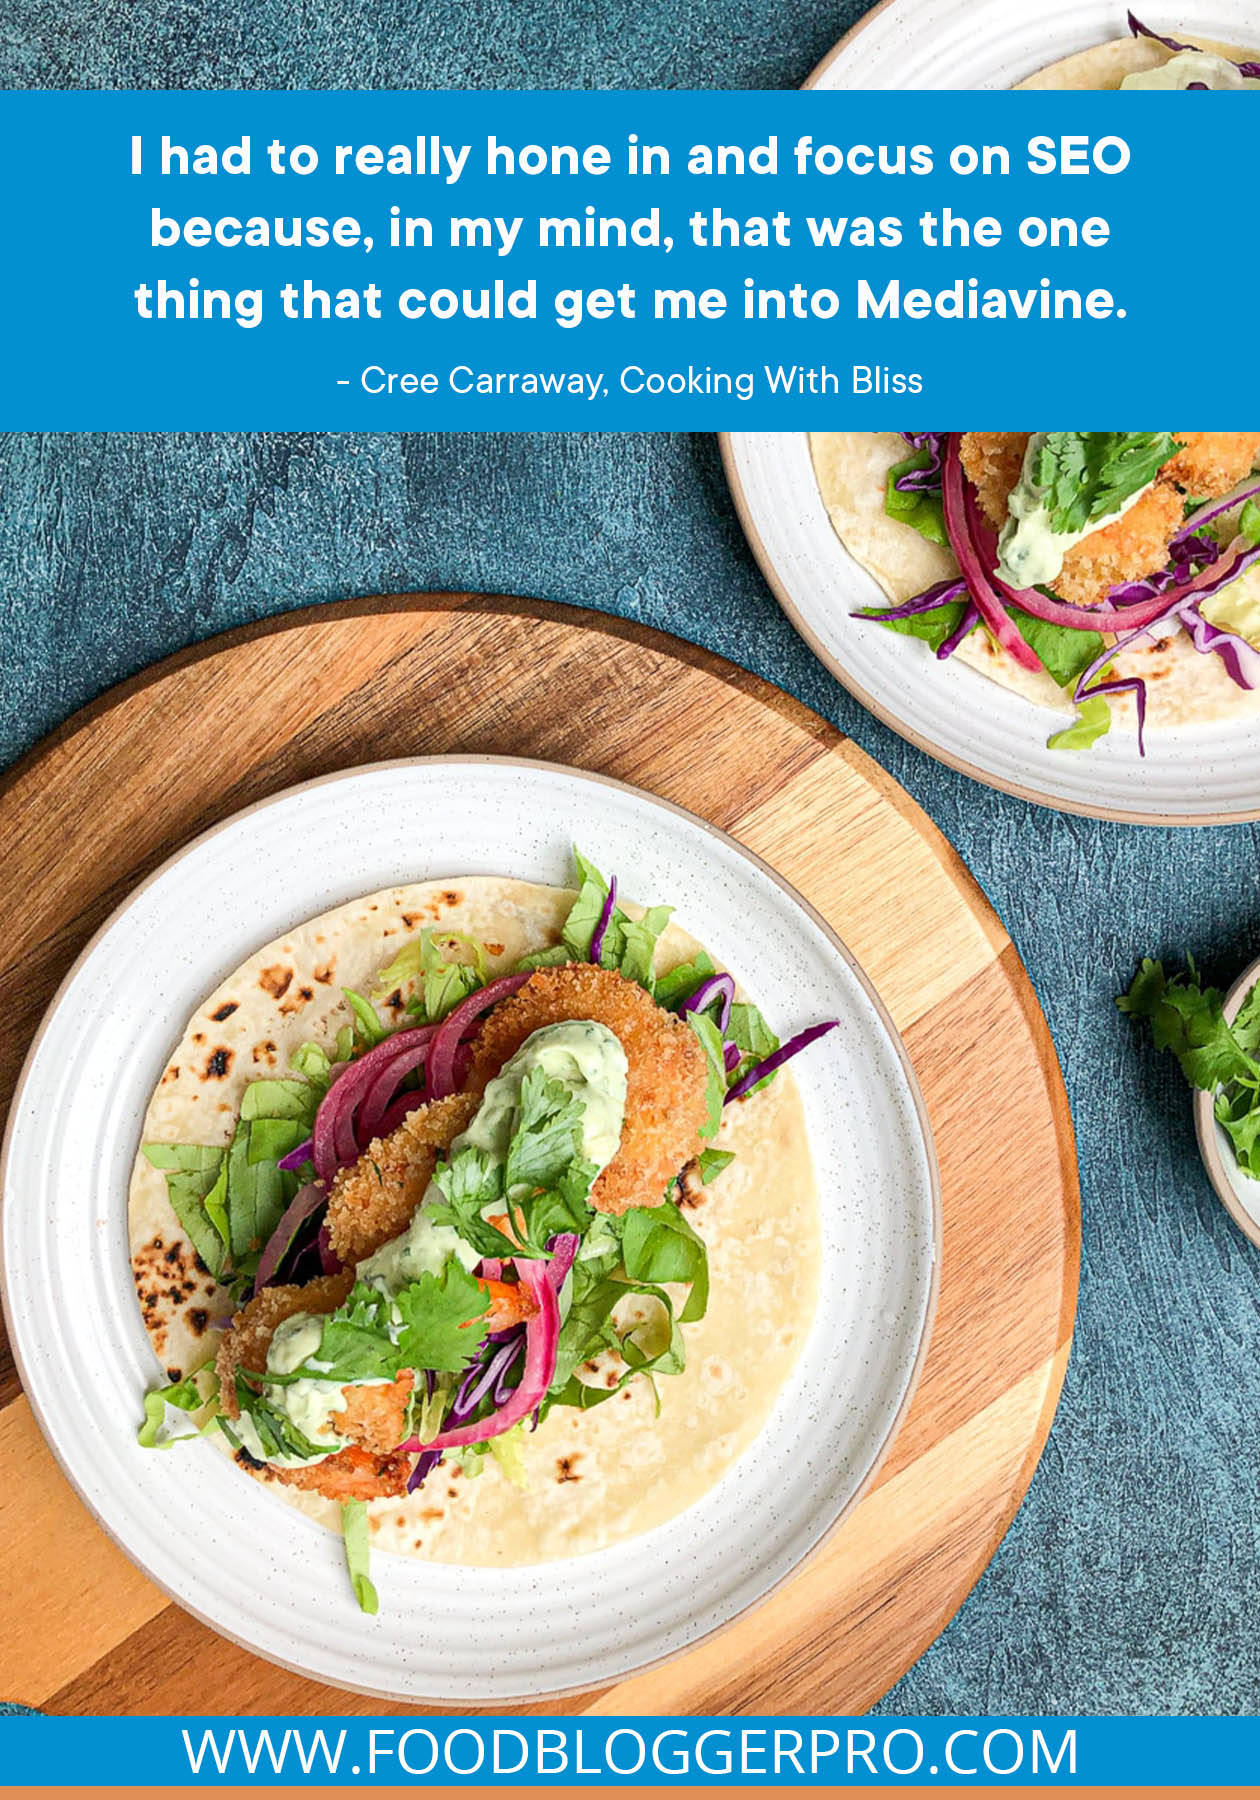 A photograph of tacos with a quote from Cree Carraway's episode of The Food Blogger Pro Podcast that reads, "I had to really hone in and focus on SEO because, in my mind, that was the one thing that could get me into Mediavine."